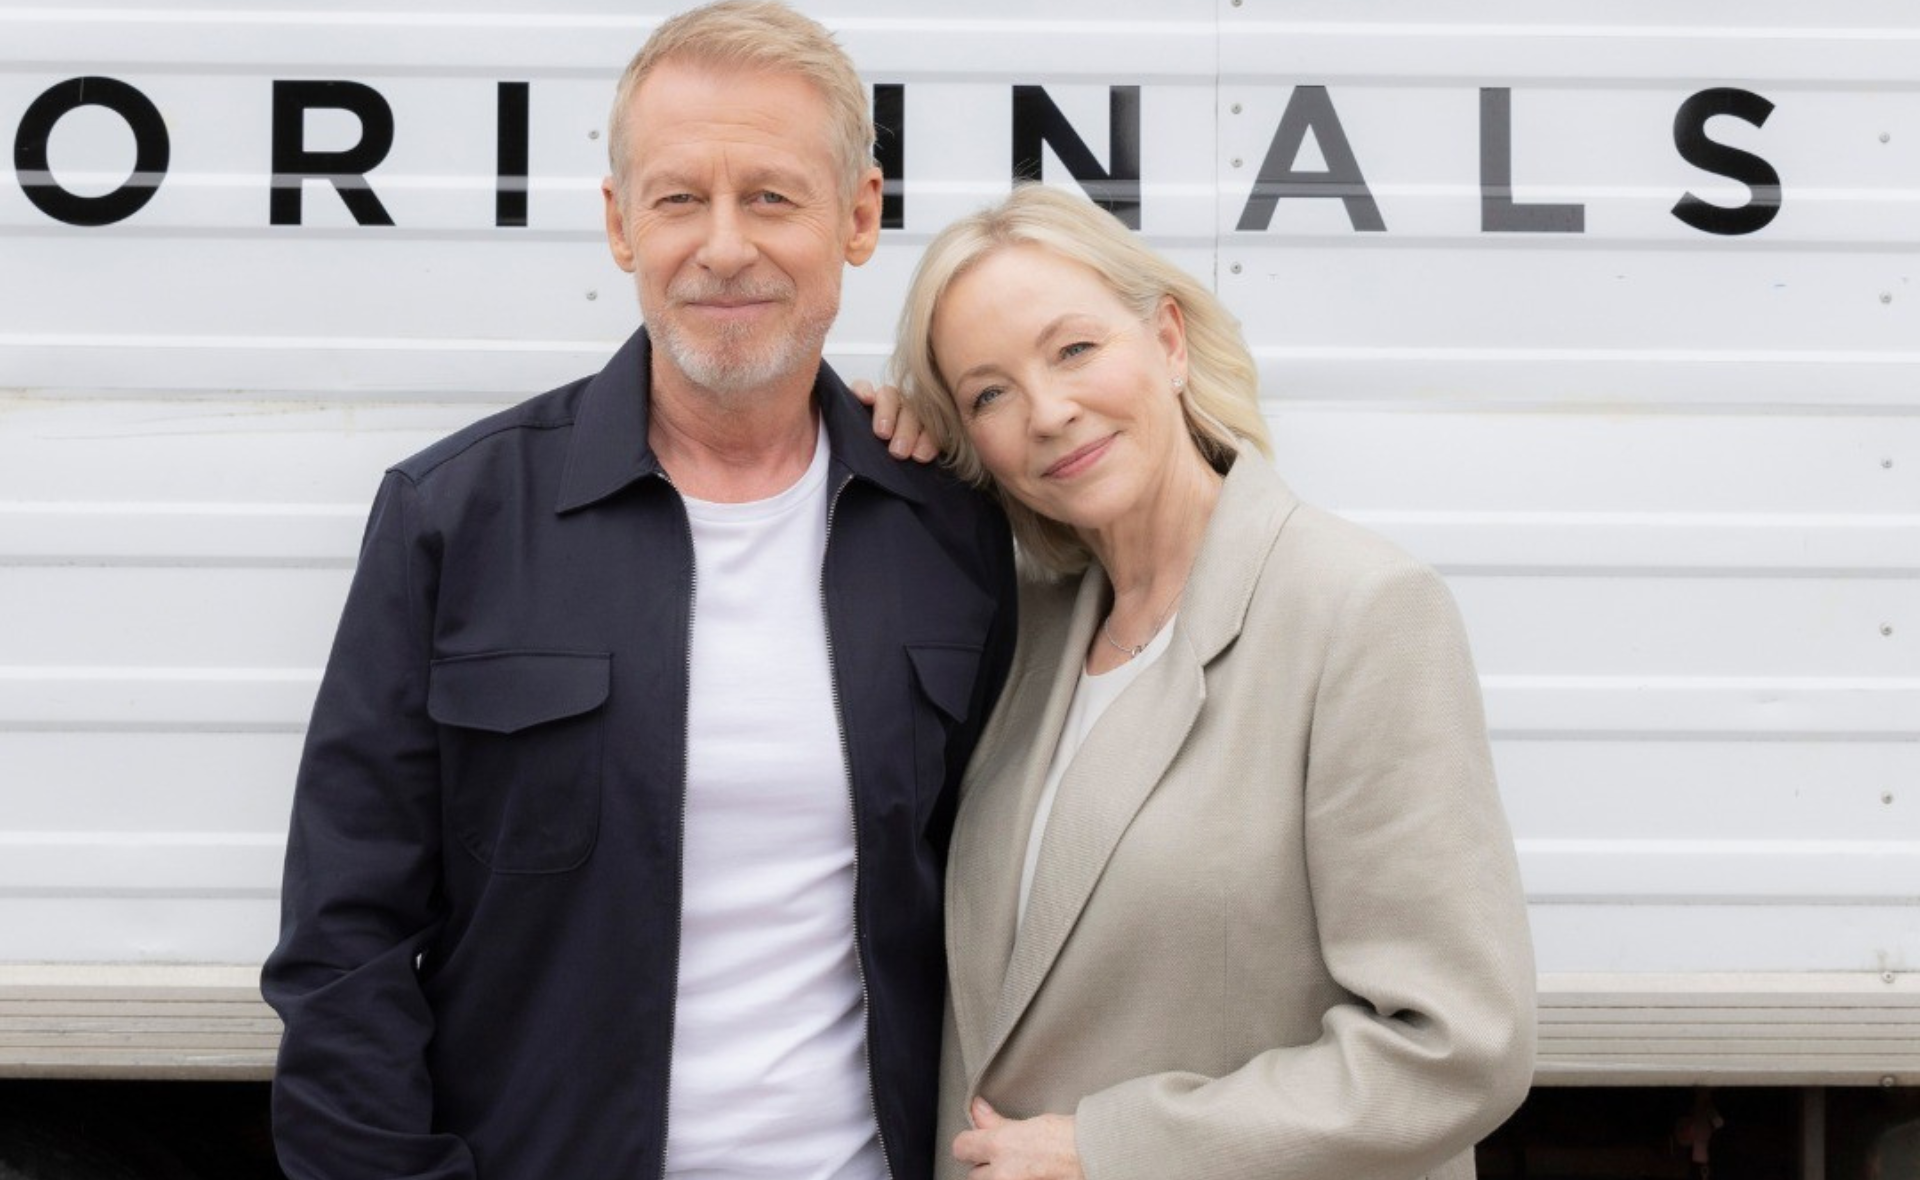 Rebecca Gibney to star as megachurch mastermind in new Stan original series